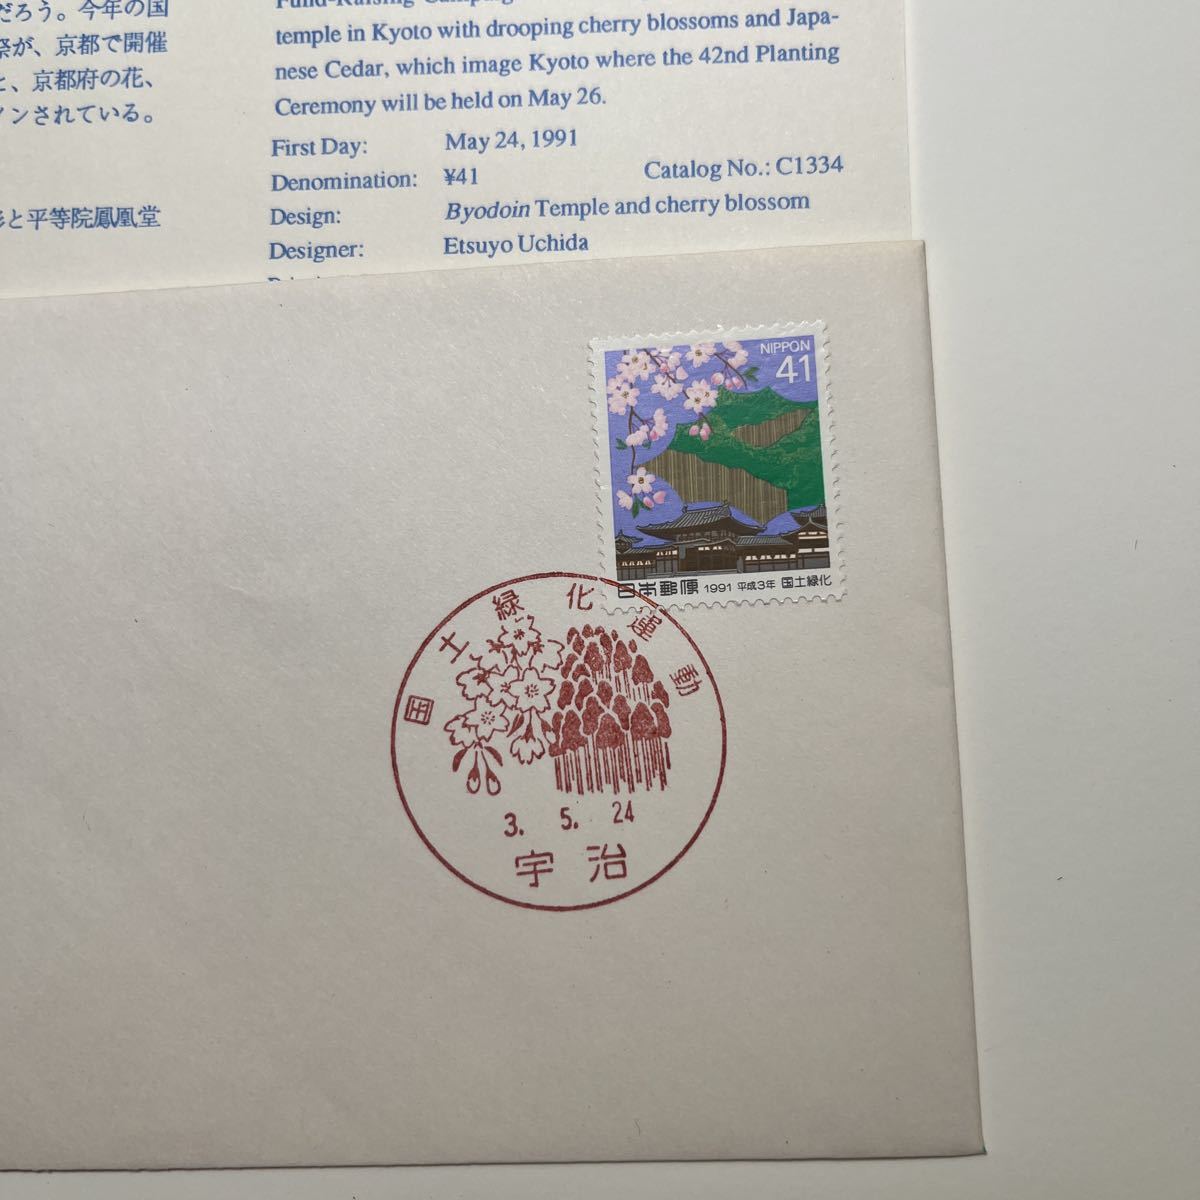 『OA』国道緑化運動記念印！　初日カバー　First day Cover　切手解説書入り　FDC 平成3年宇治　★送料84円★_画像2